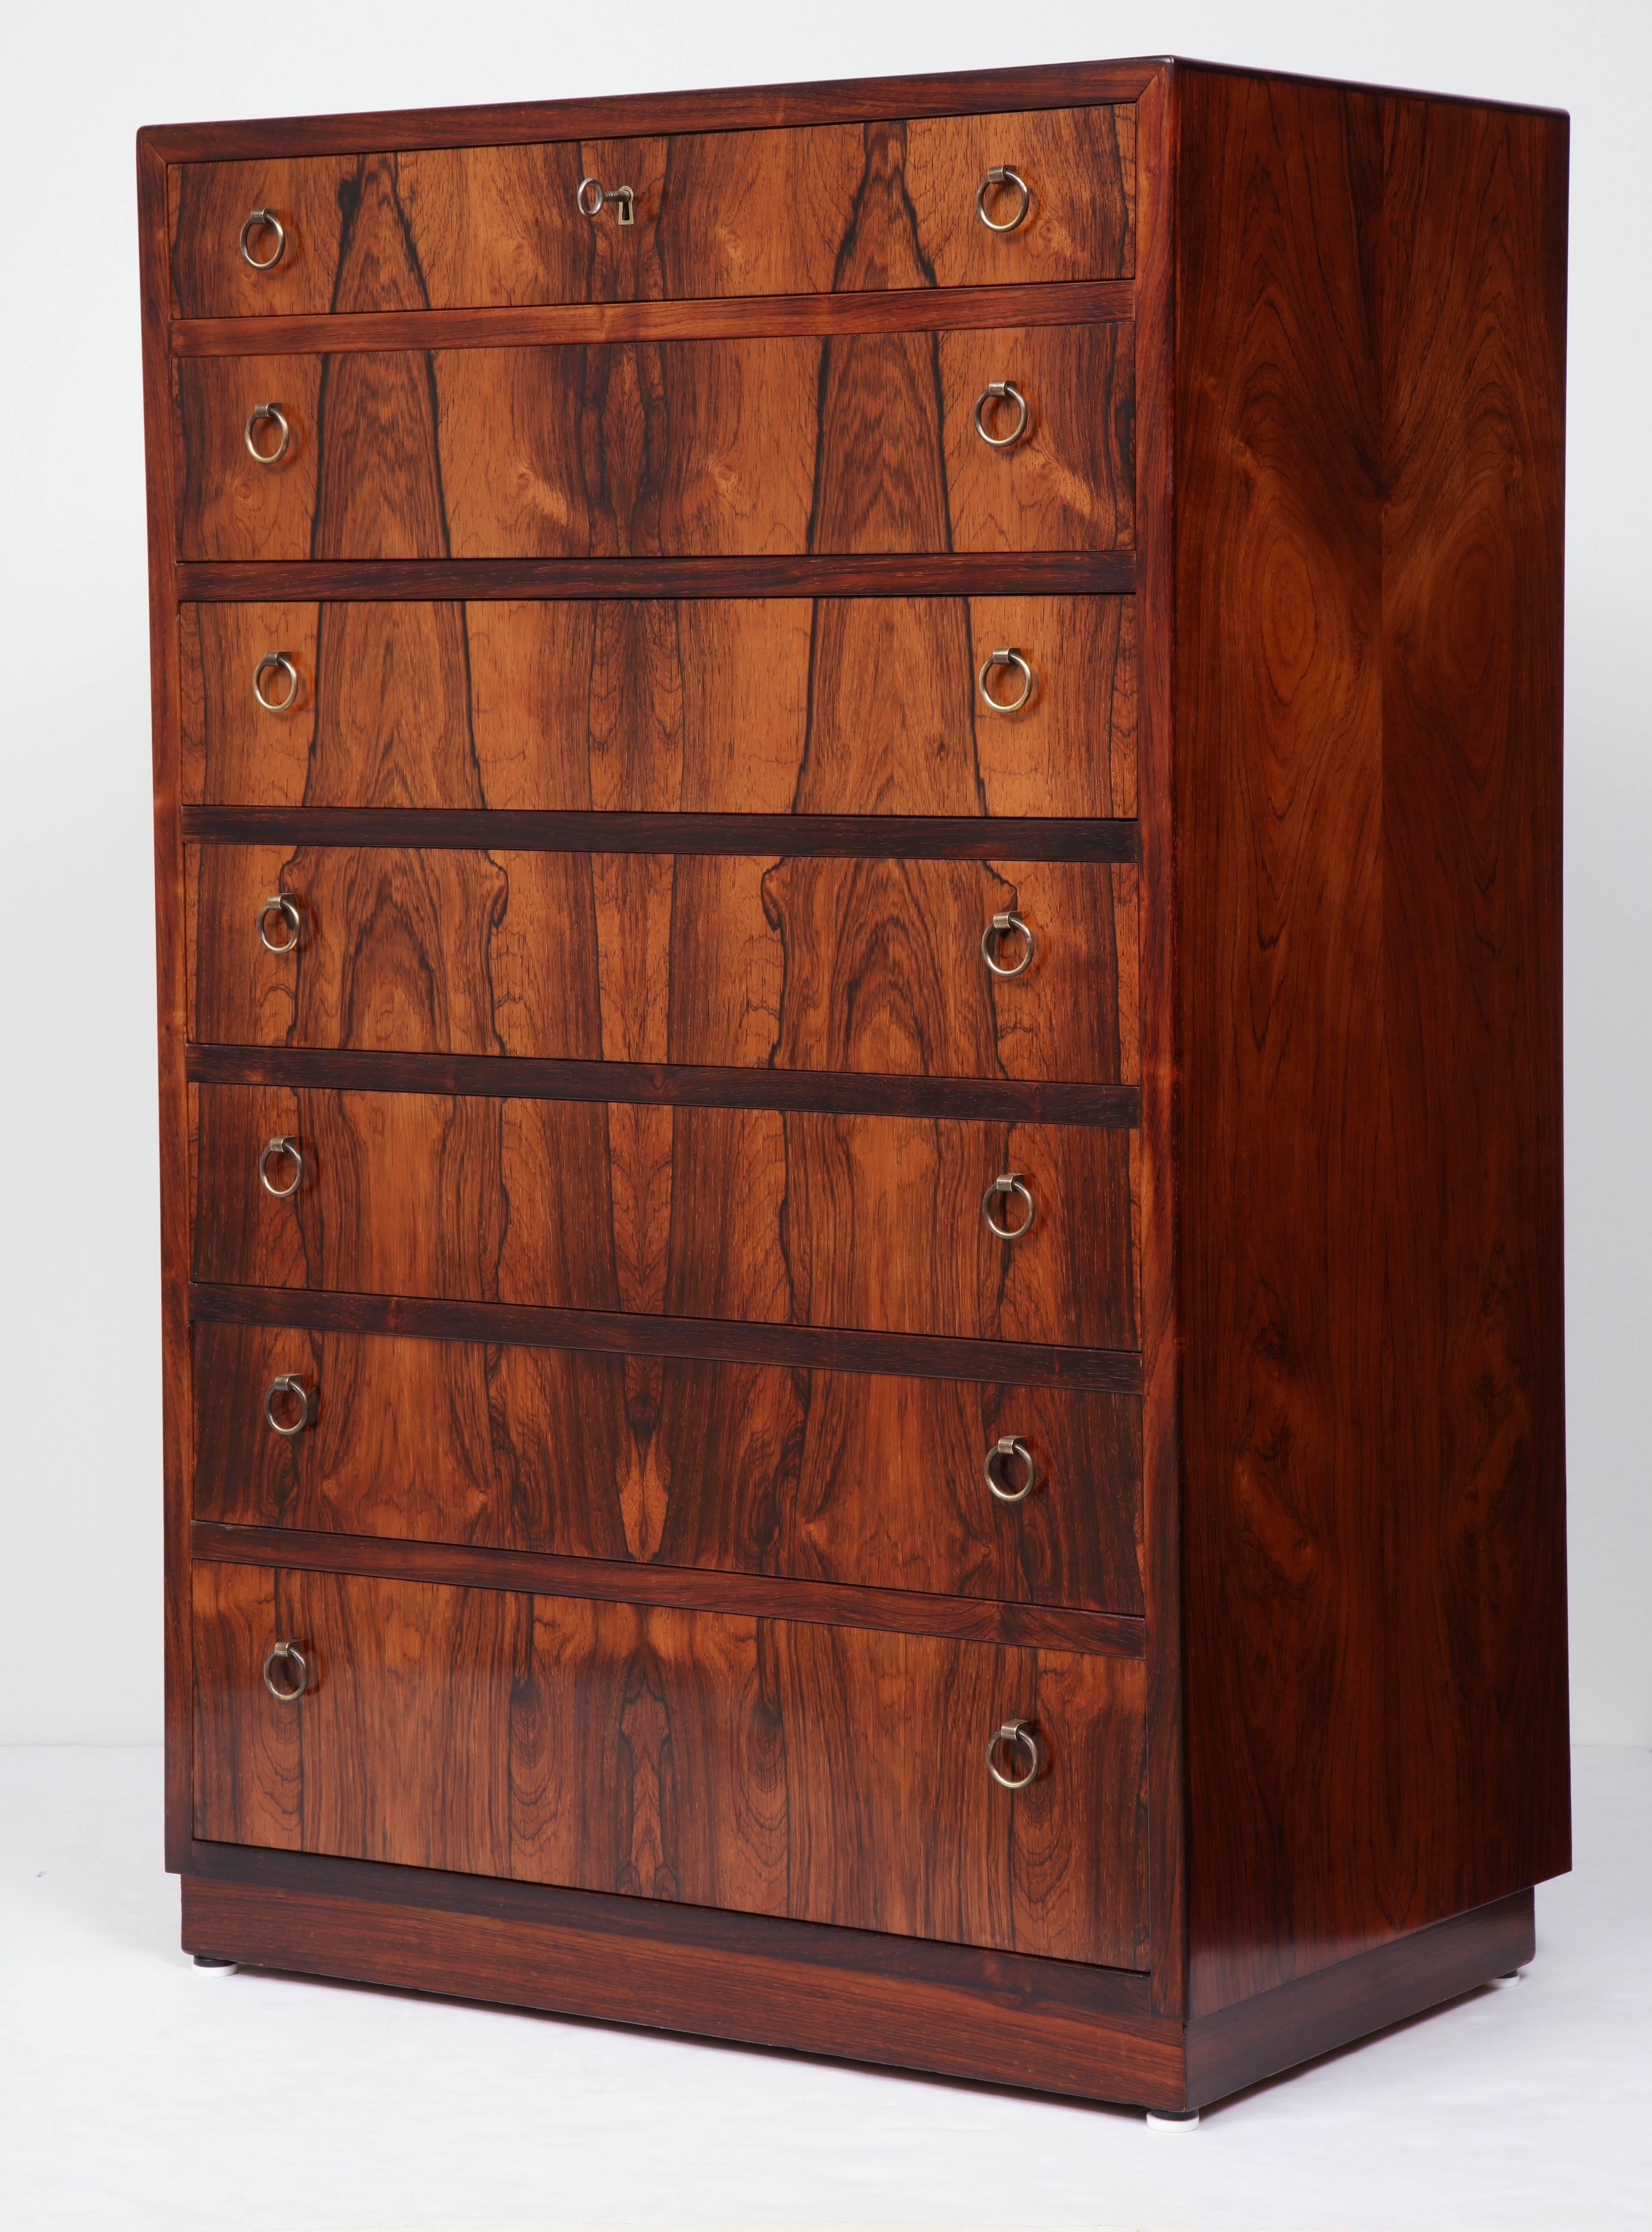 A Danish Brazilian rosewood tall chest of drawers, circa 1940s, of rectangular form with seven graduated drawers and brass ring pulls, raised on a plinth base. Beautiful and striking rosewood veneer on all sides.